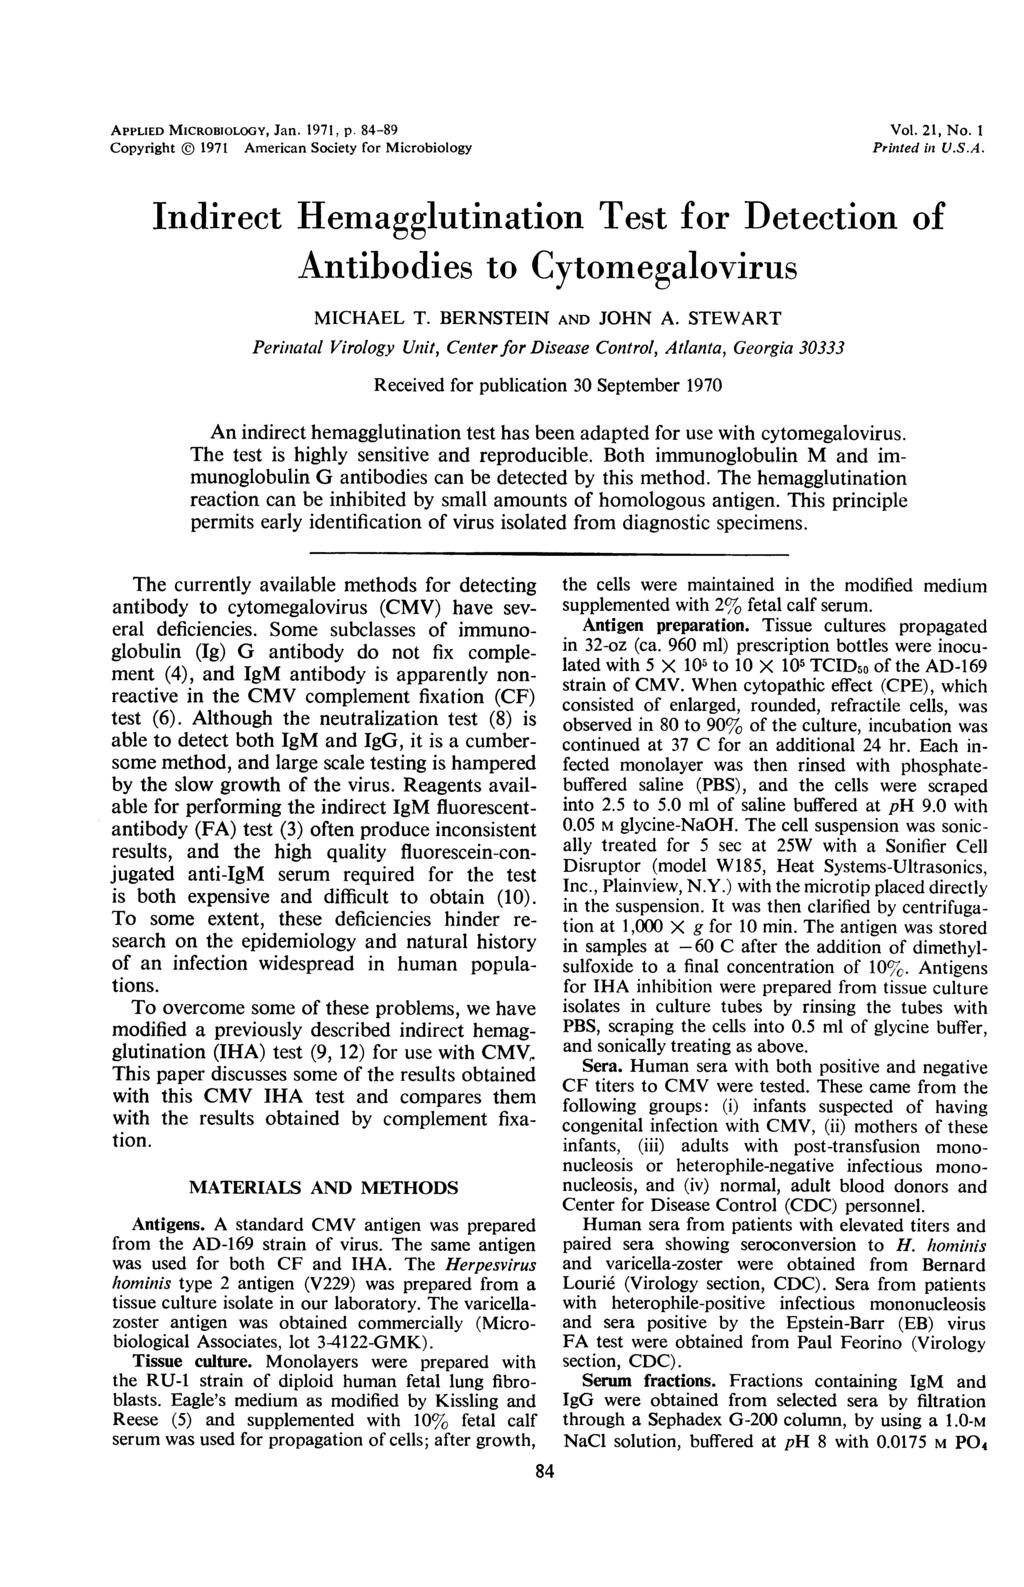 APPLIED MICROBIOLOGY, Jan. 1971, p. 84-89 Copyright 1971 American Society for Microbiology Vol. 21, No. 1 Printed in U.S.A. Indirect Hemagglutination Test for Detection of Antibodies to Cytomegalovirus MICHAEL T.